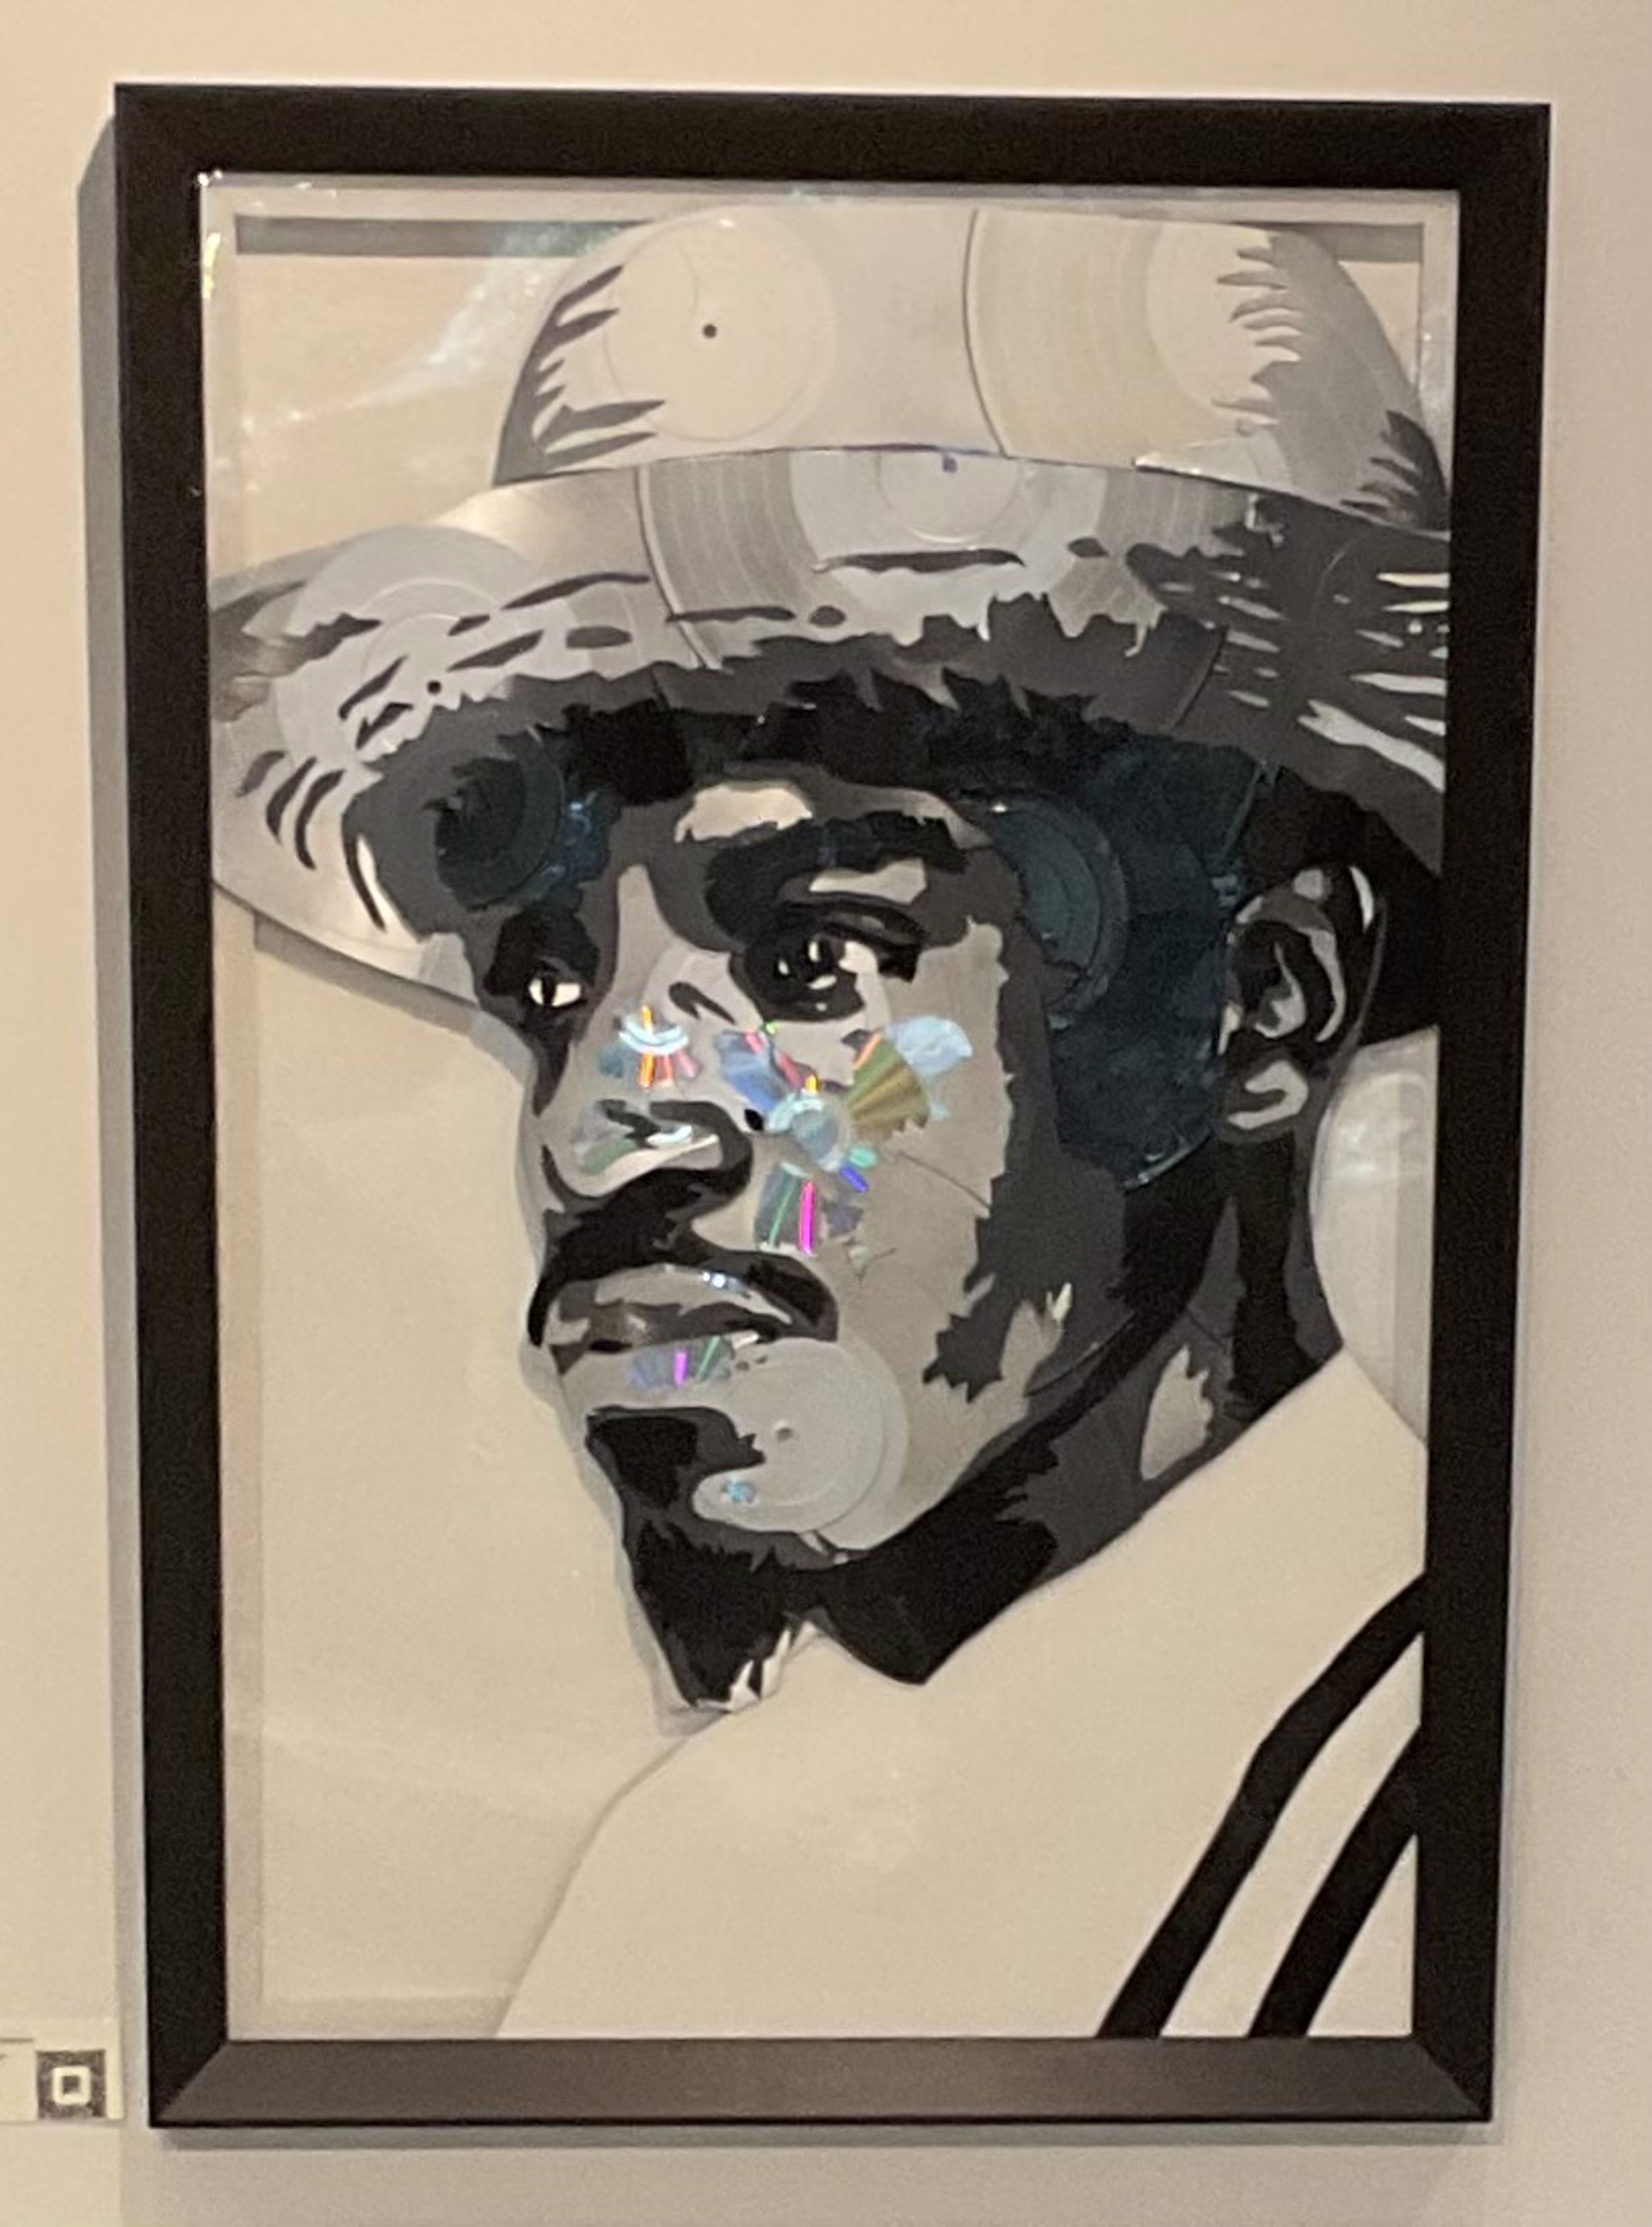 Andre 3000 by Michael Johnson (Mike J)